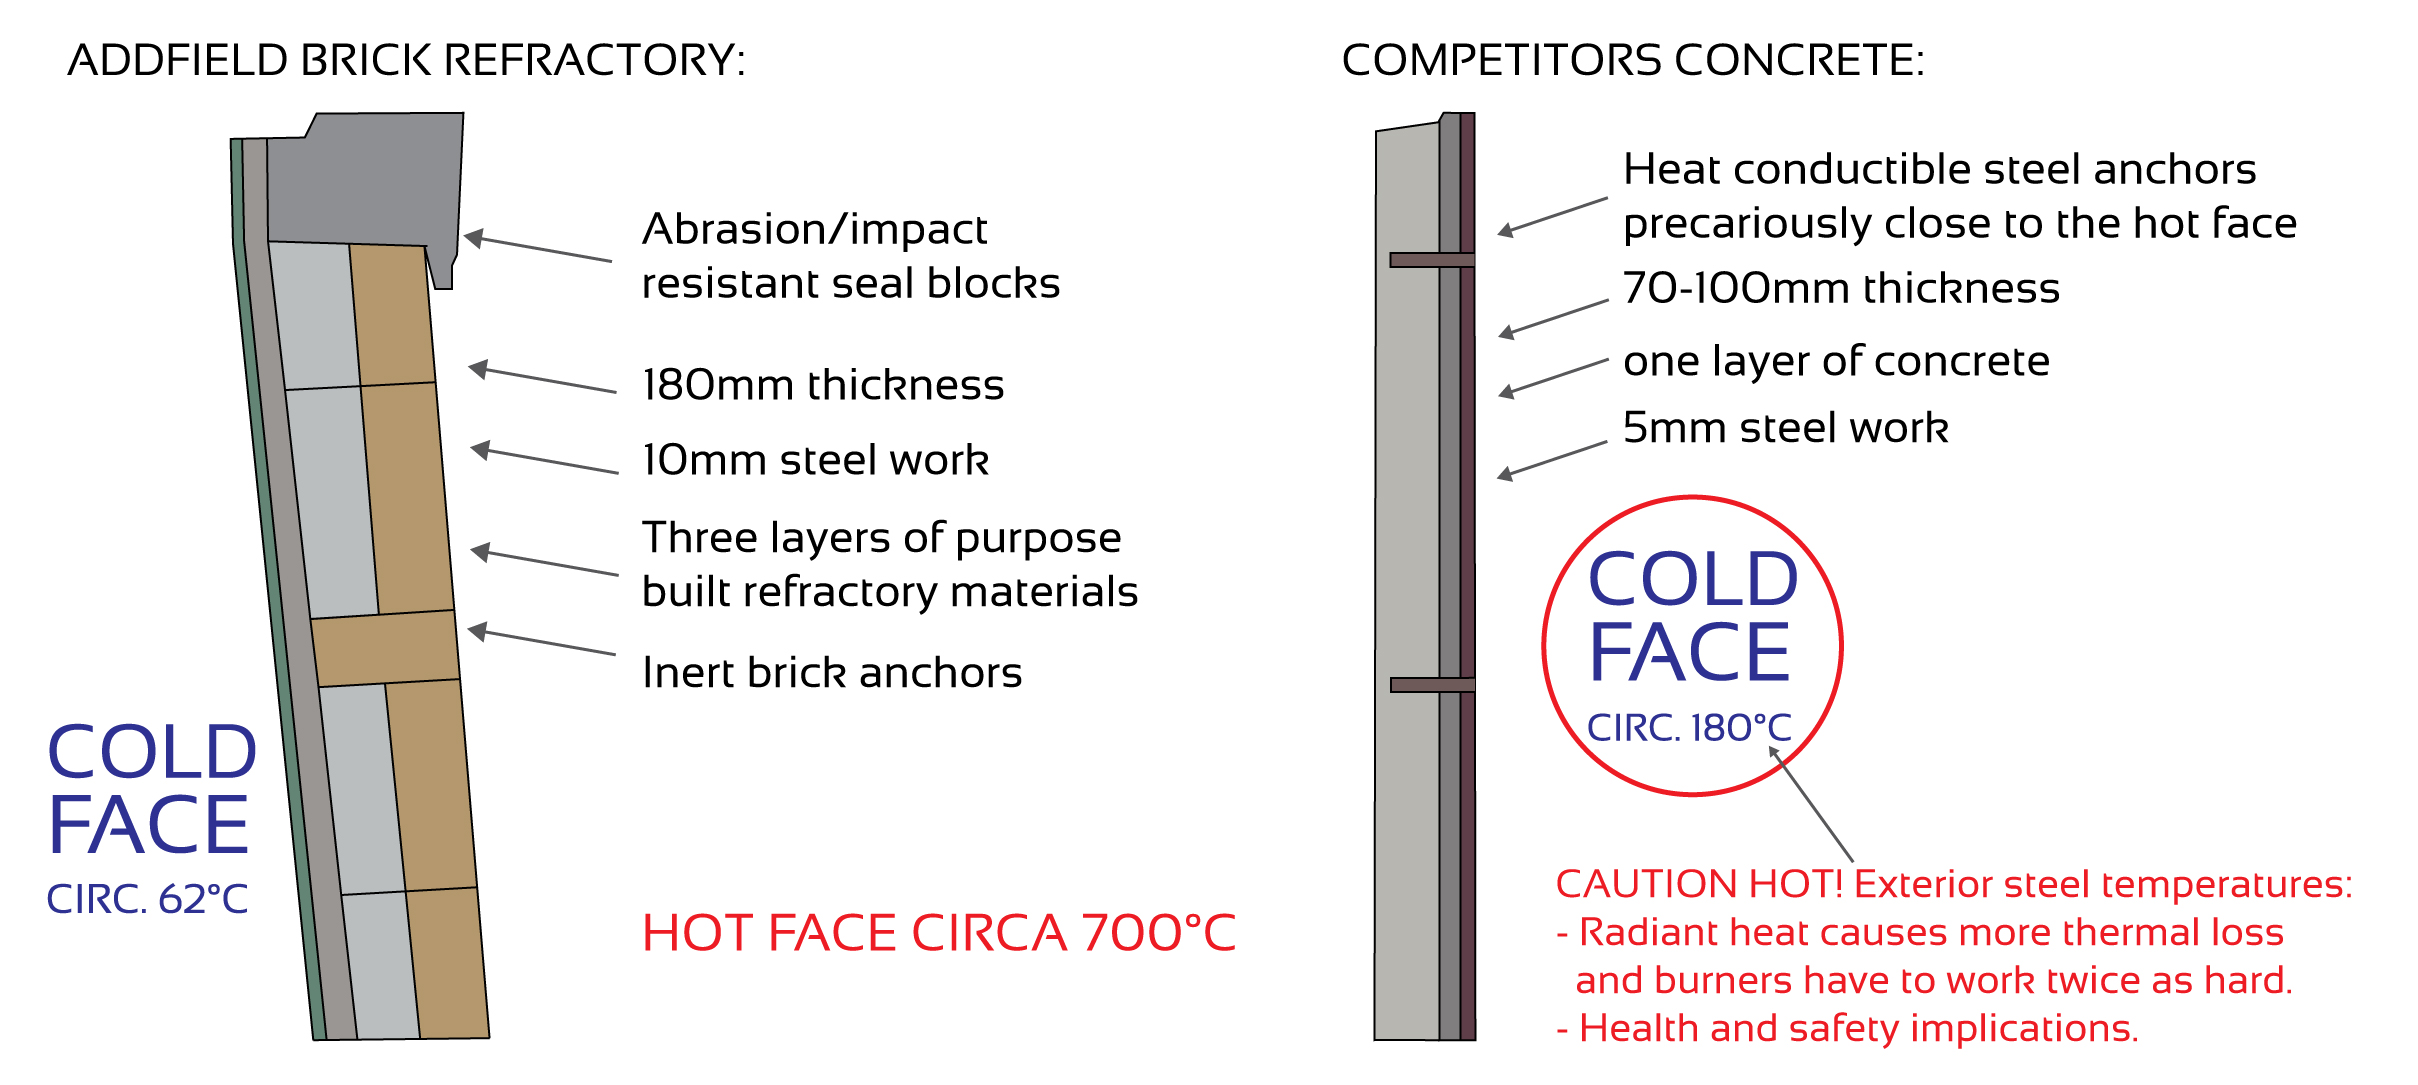 Difference between Concrete and Brick refractory